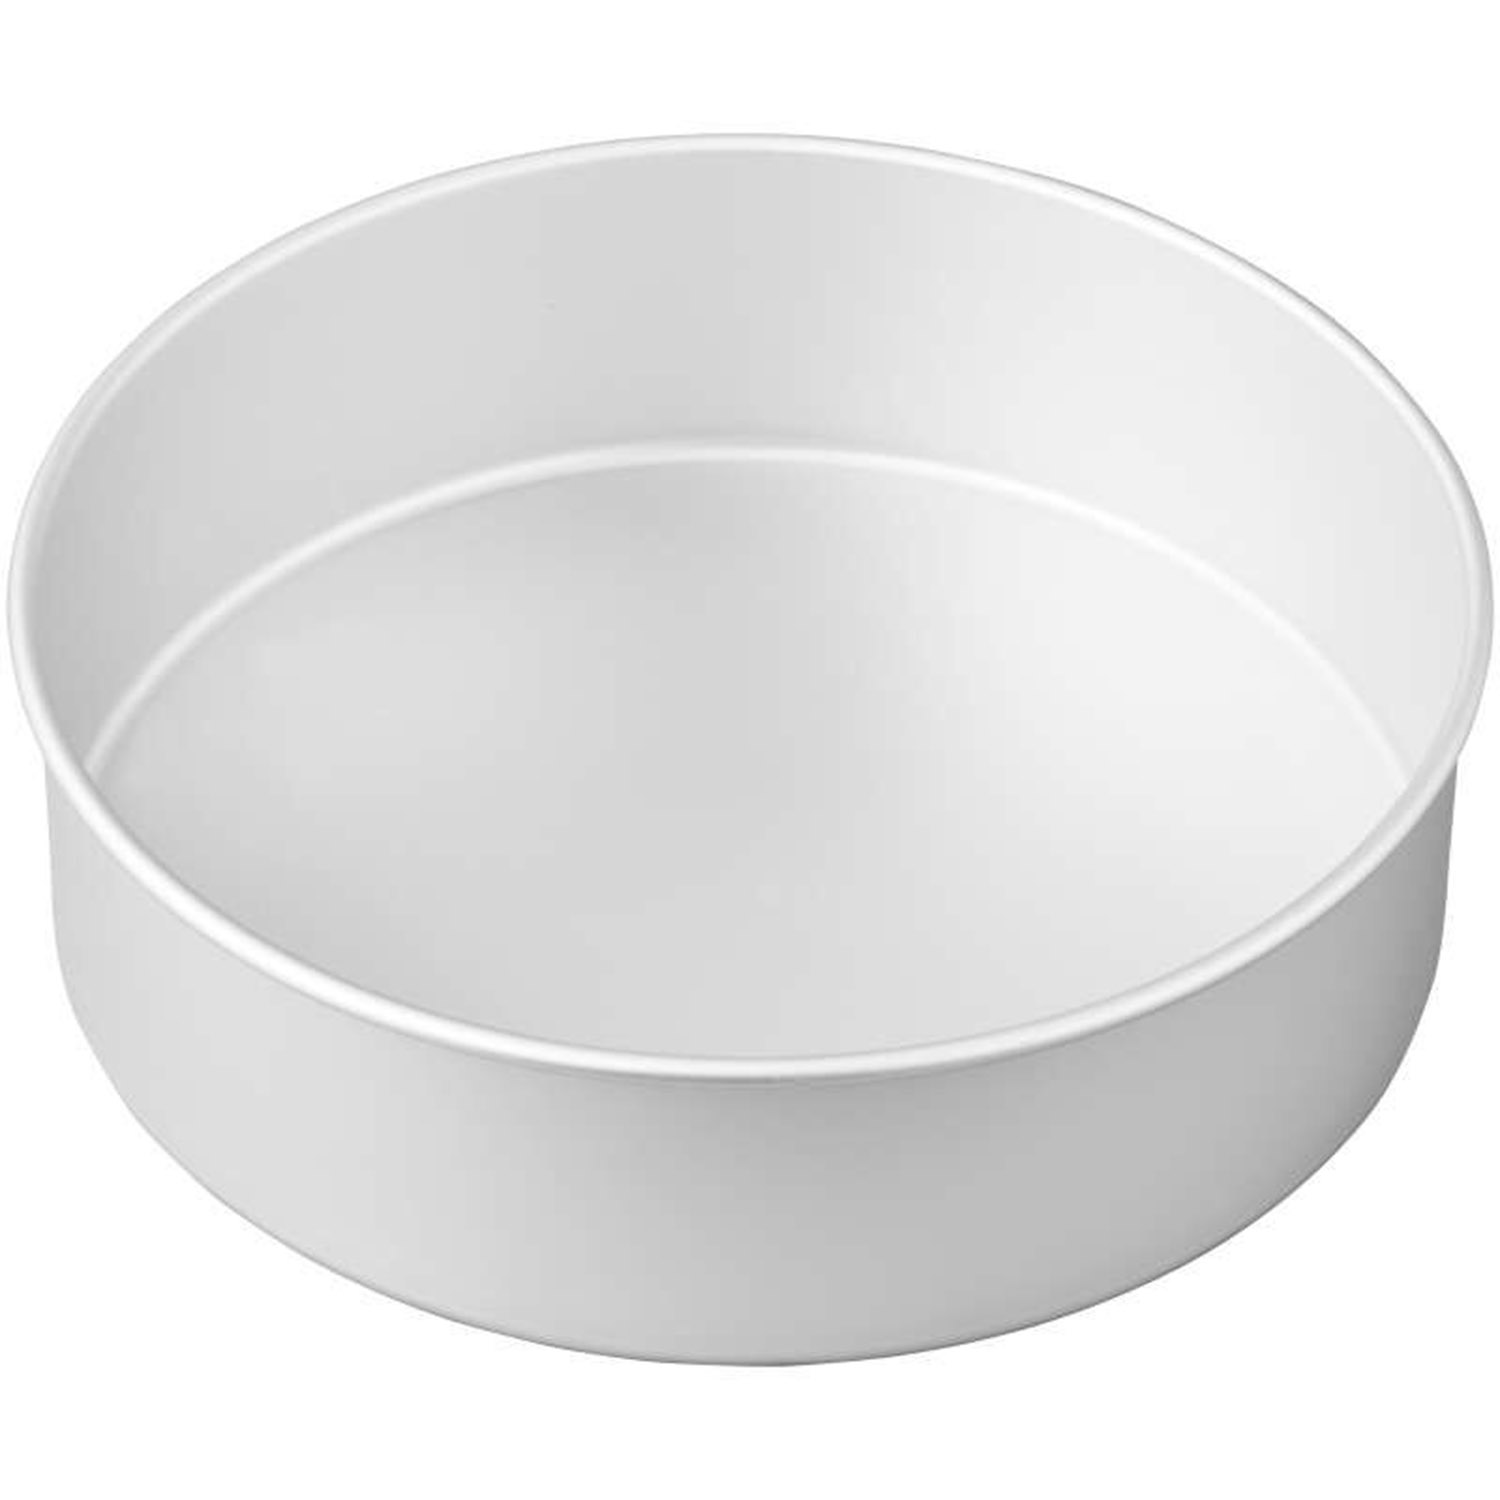 Cake Pans [The Ultimate Guide] - Country Kitchen SweetArt